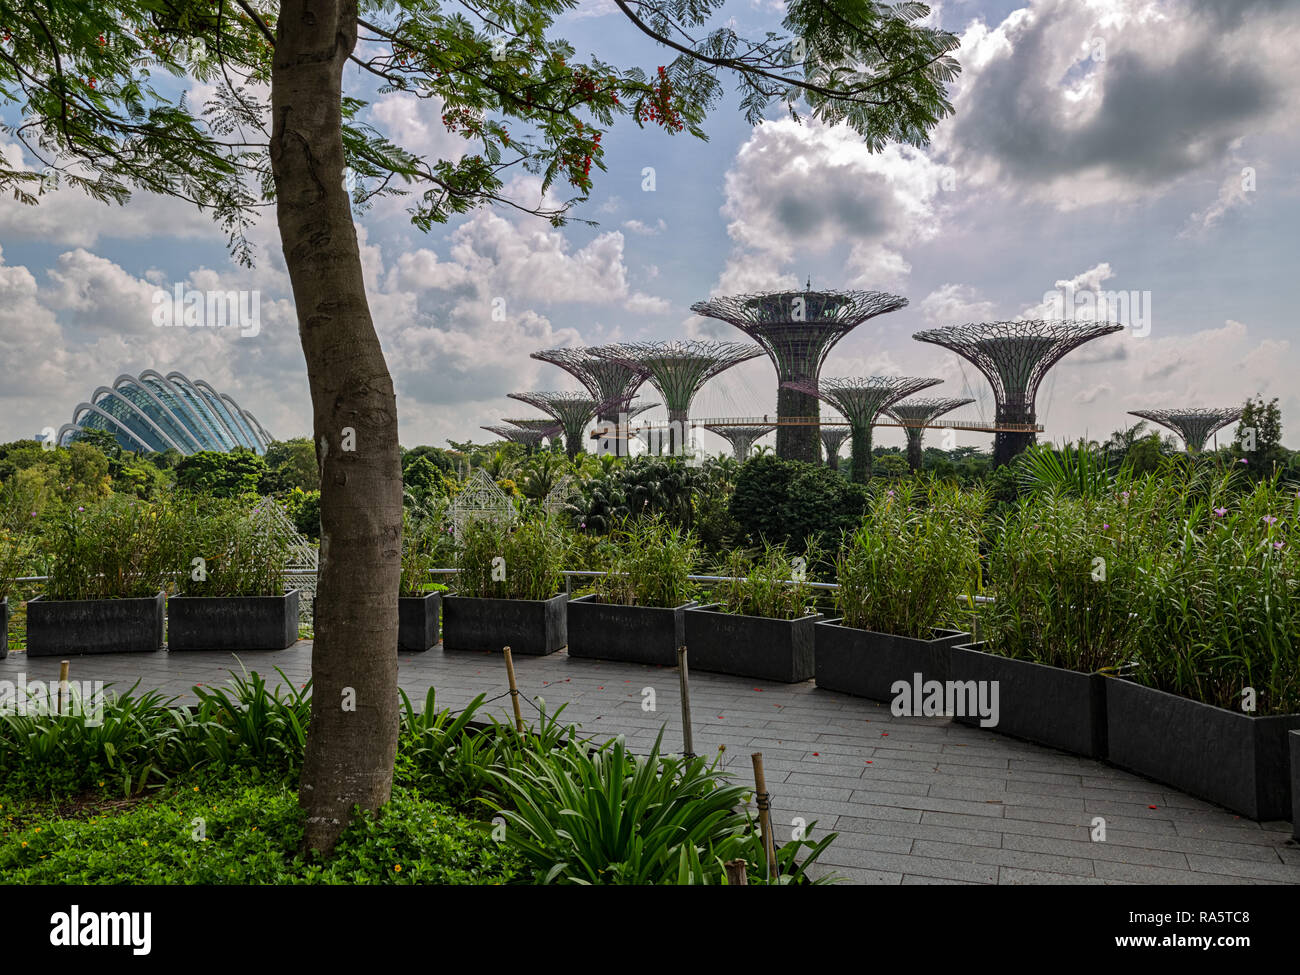 Supertree Grove in Gardens by the Bay - Singapore Stock Photo